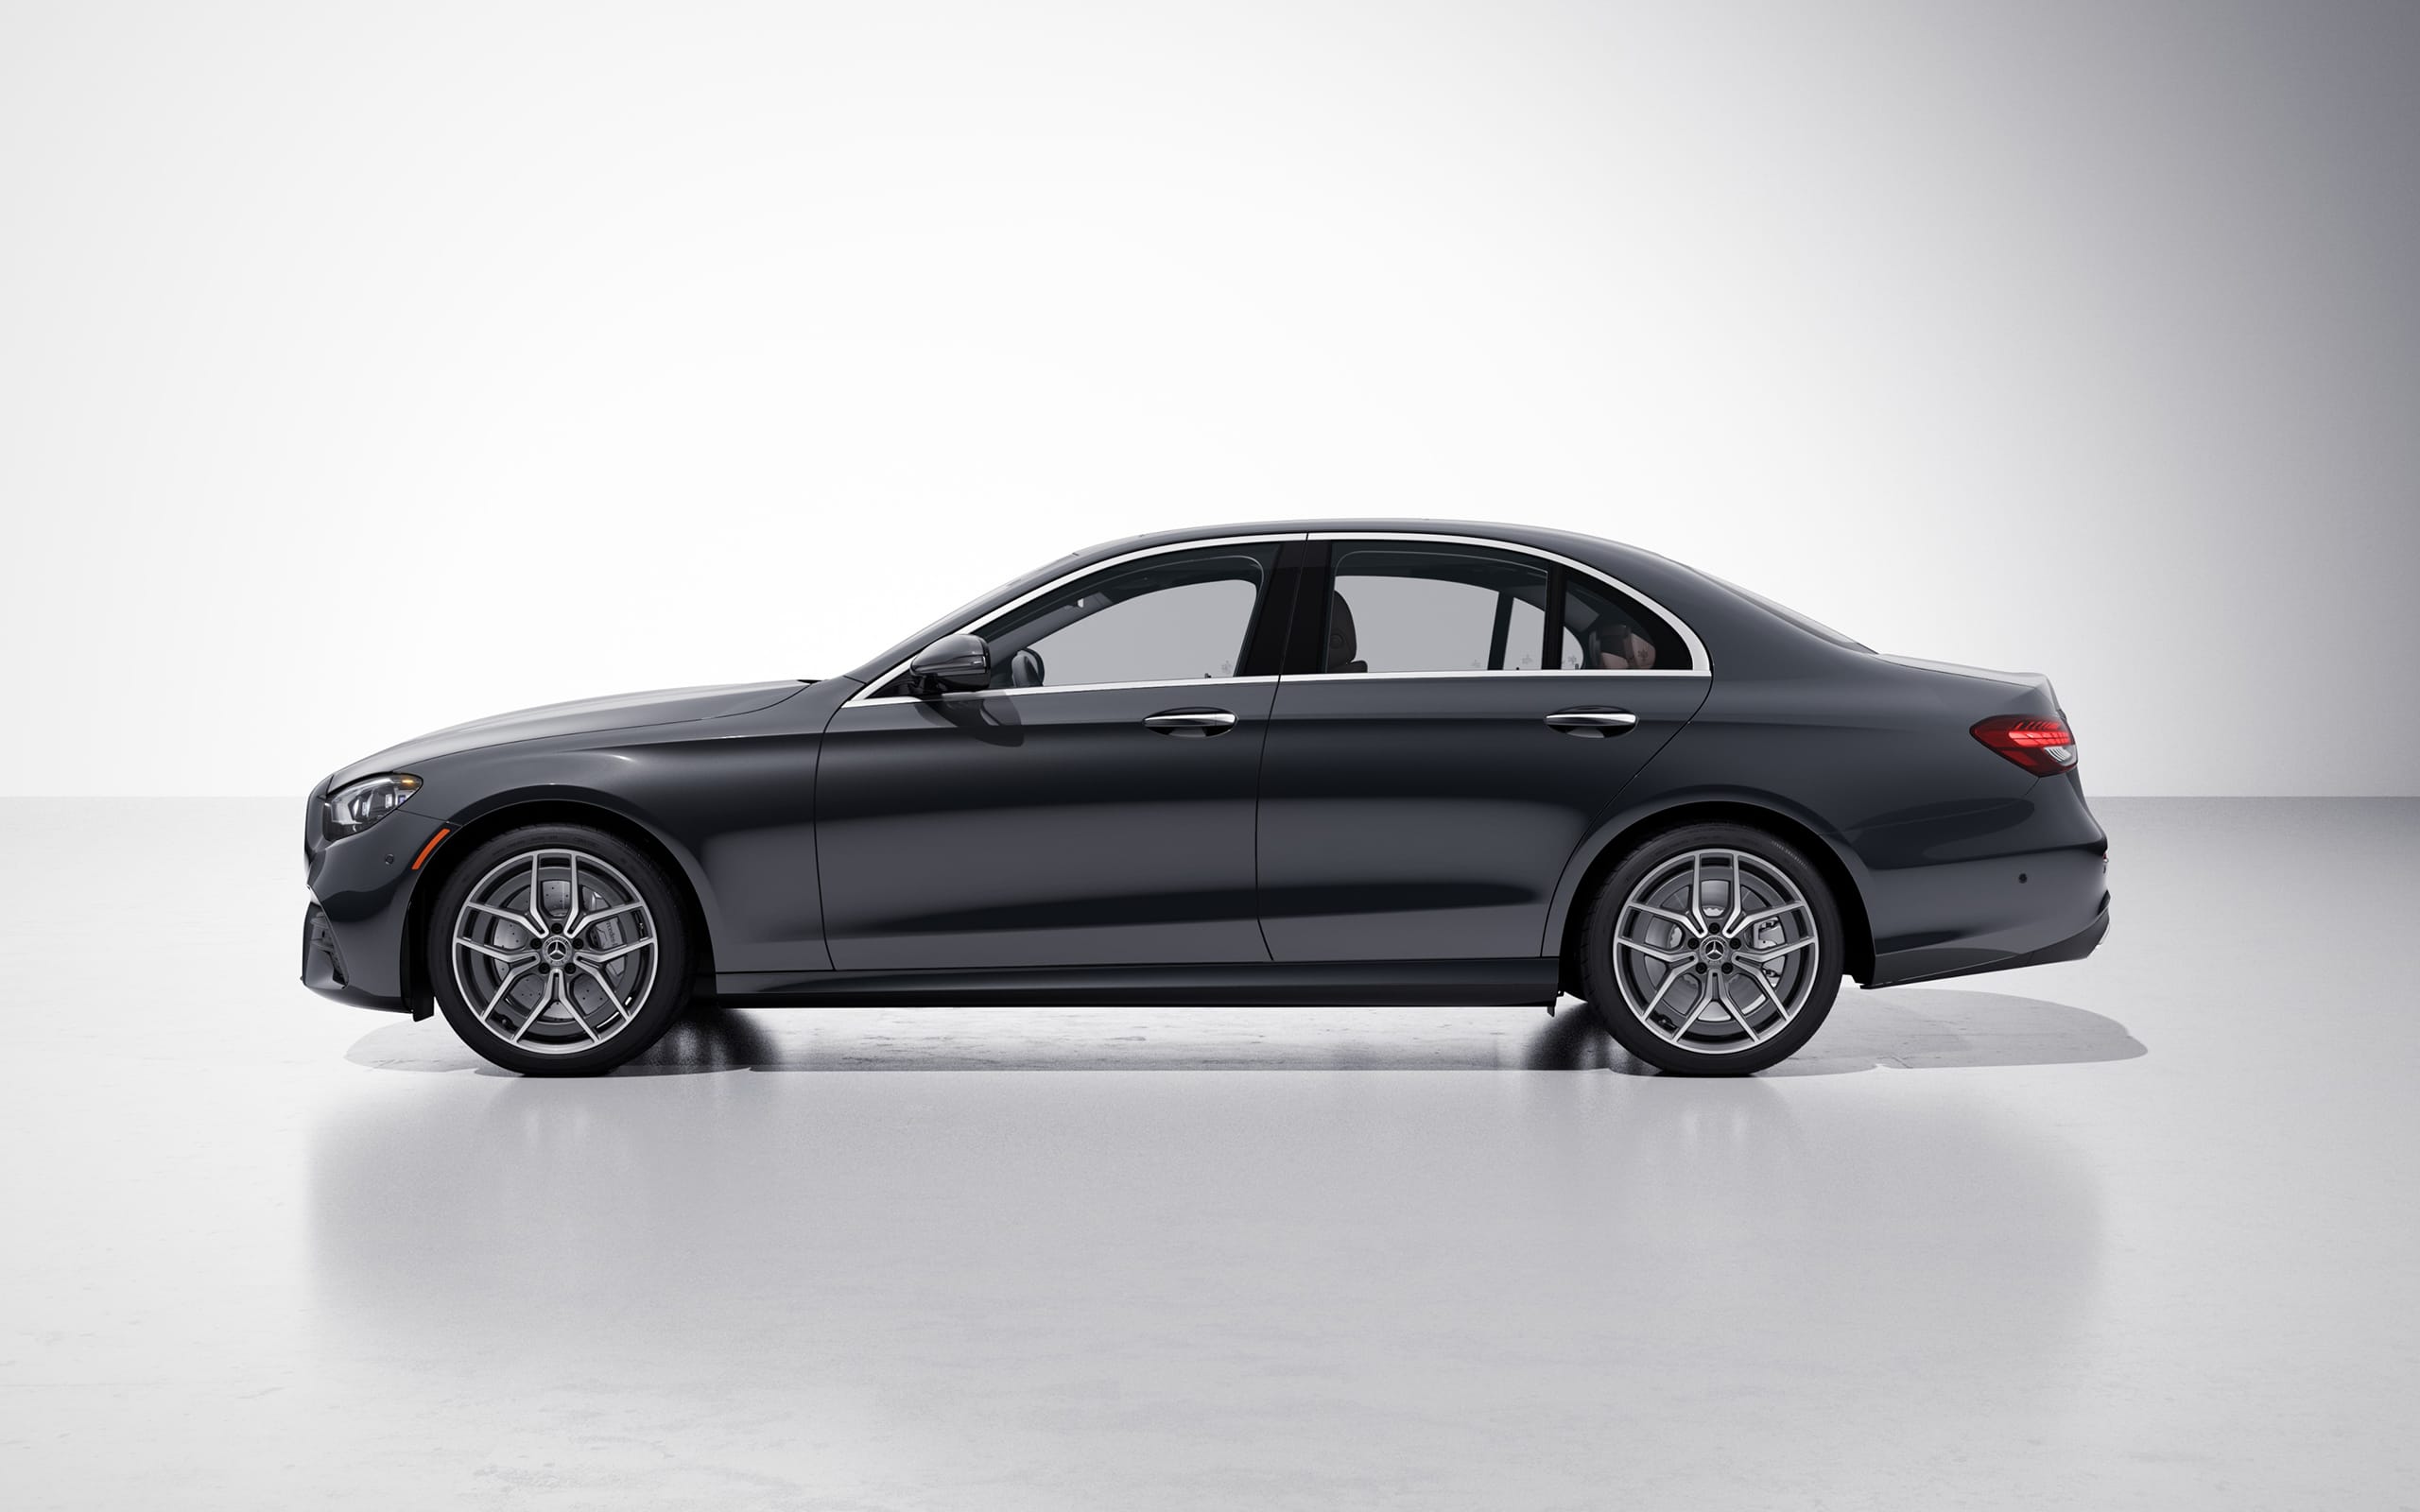 Mercedes-Benz E 220 Cdi Amg Styling Wallpapers